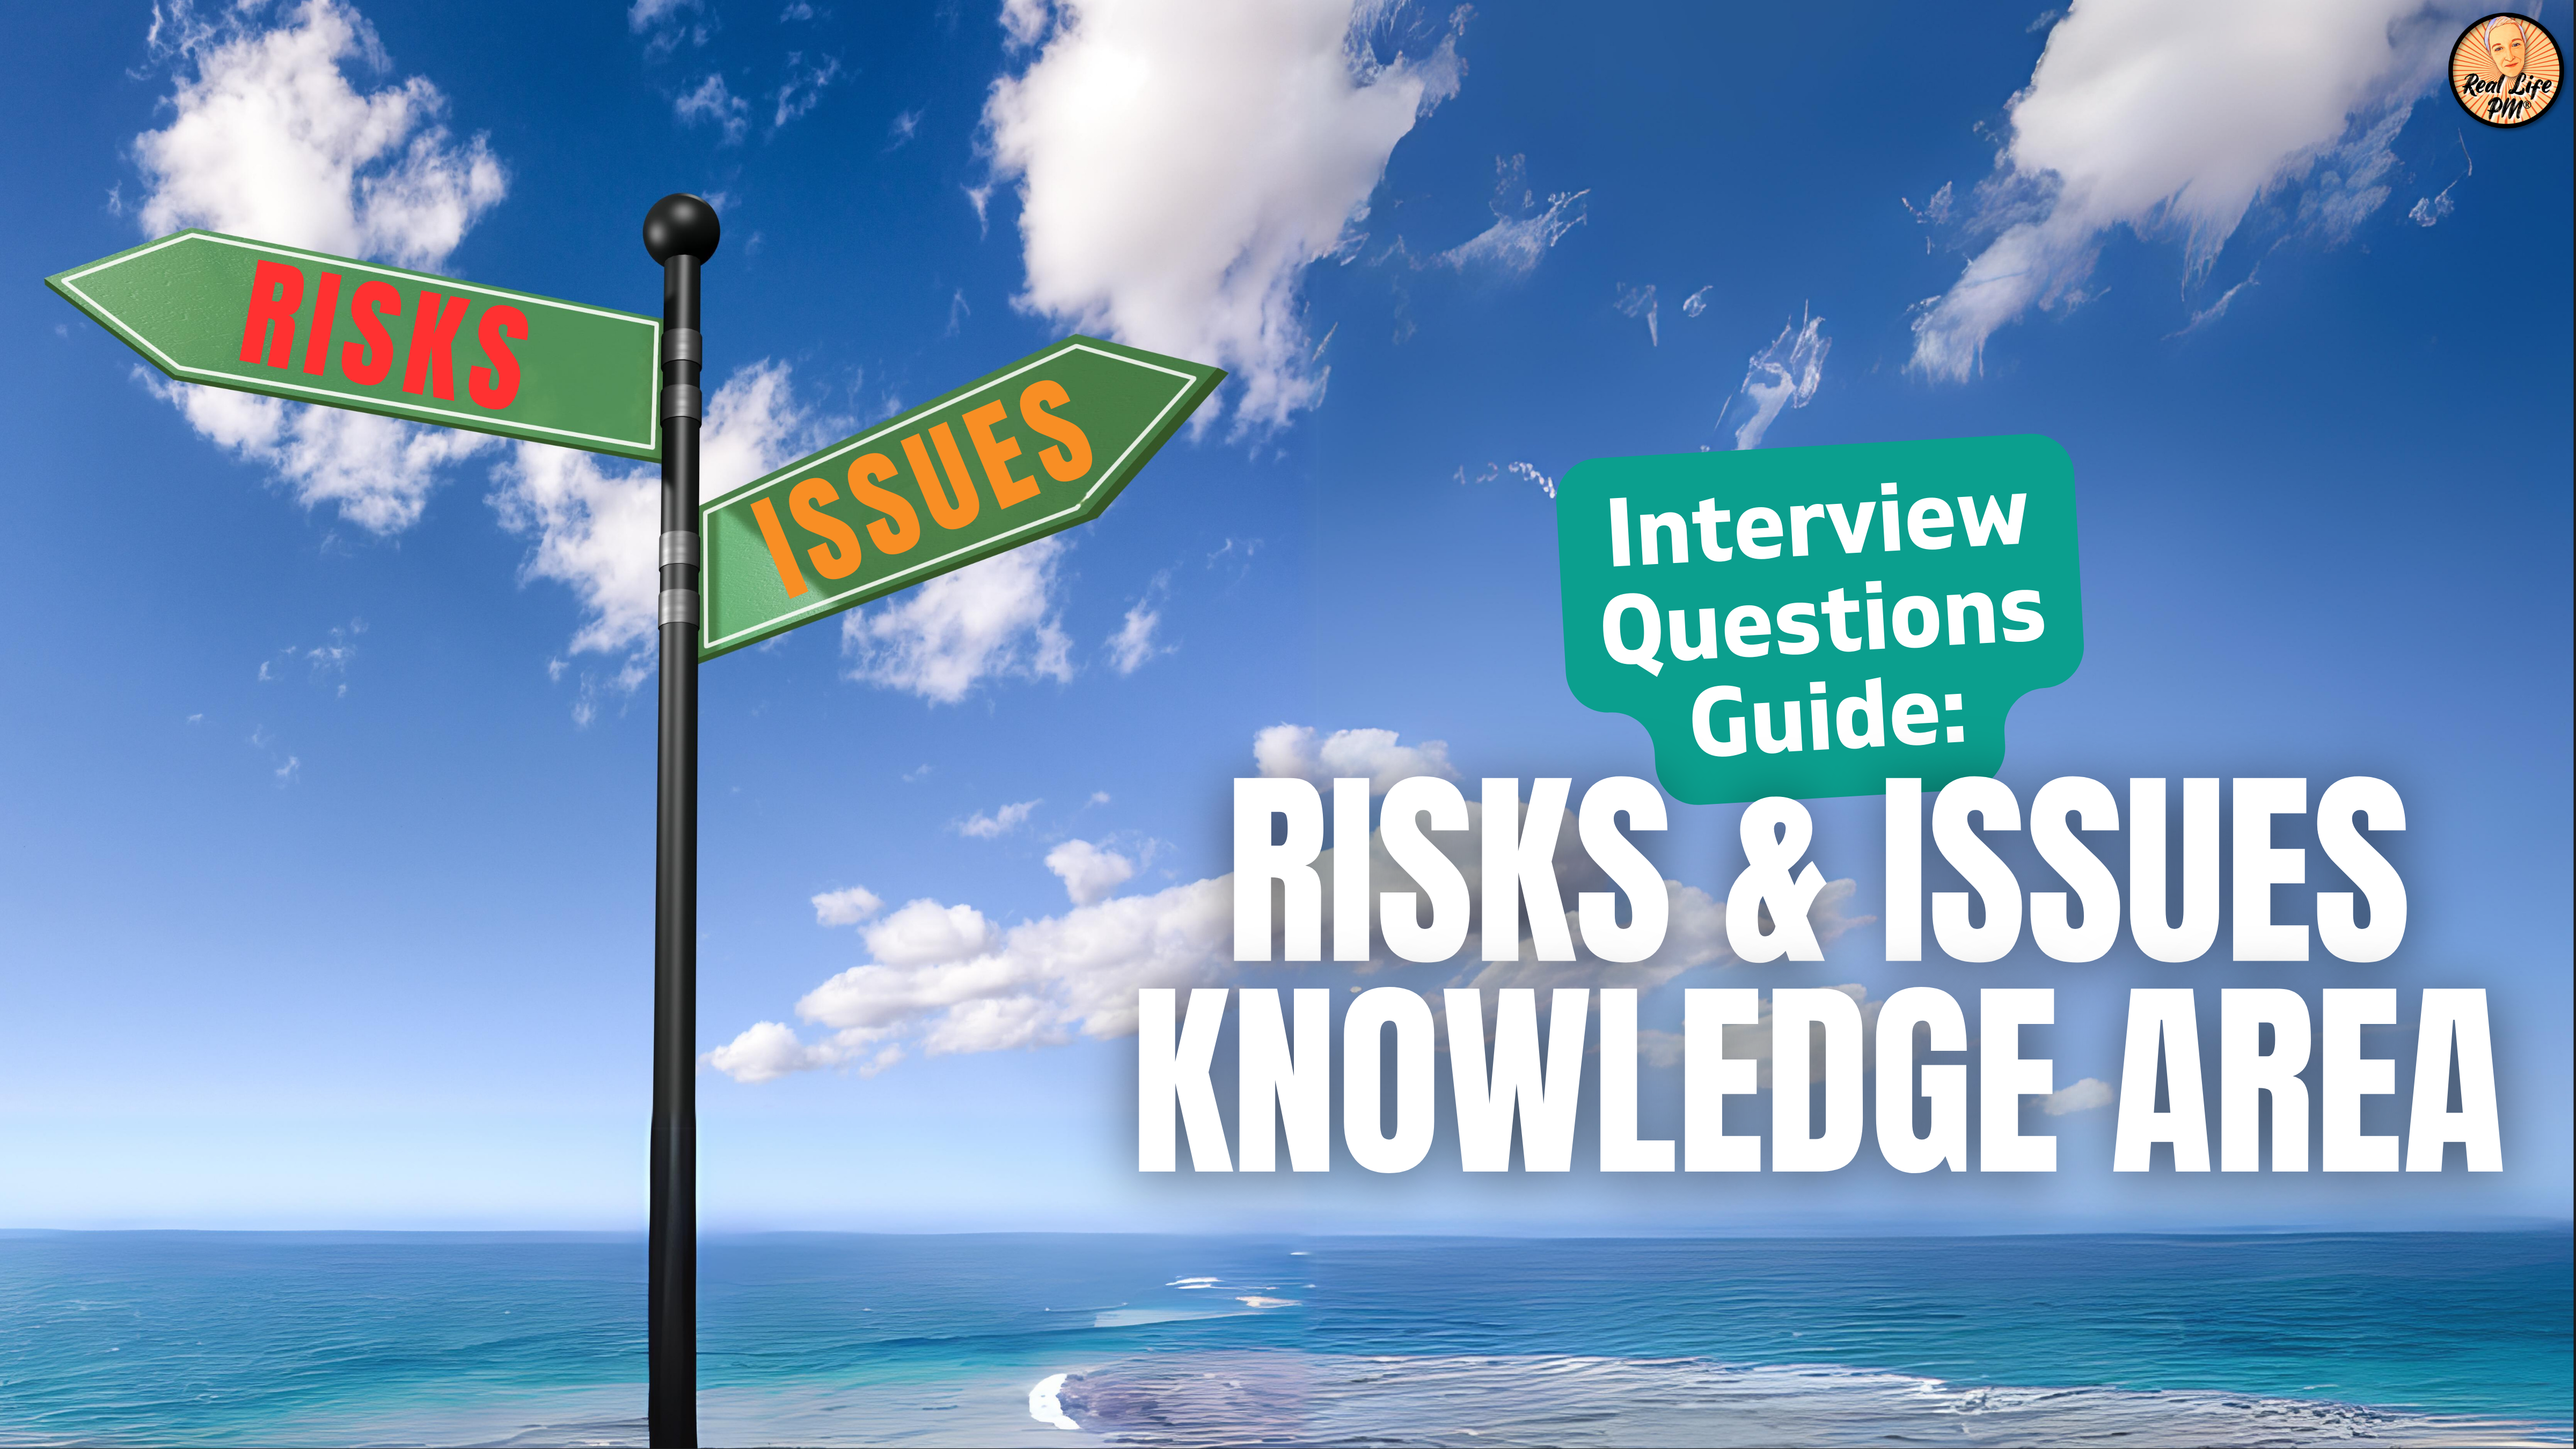 Interview Questions Guide - Risks & Issues TN